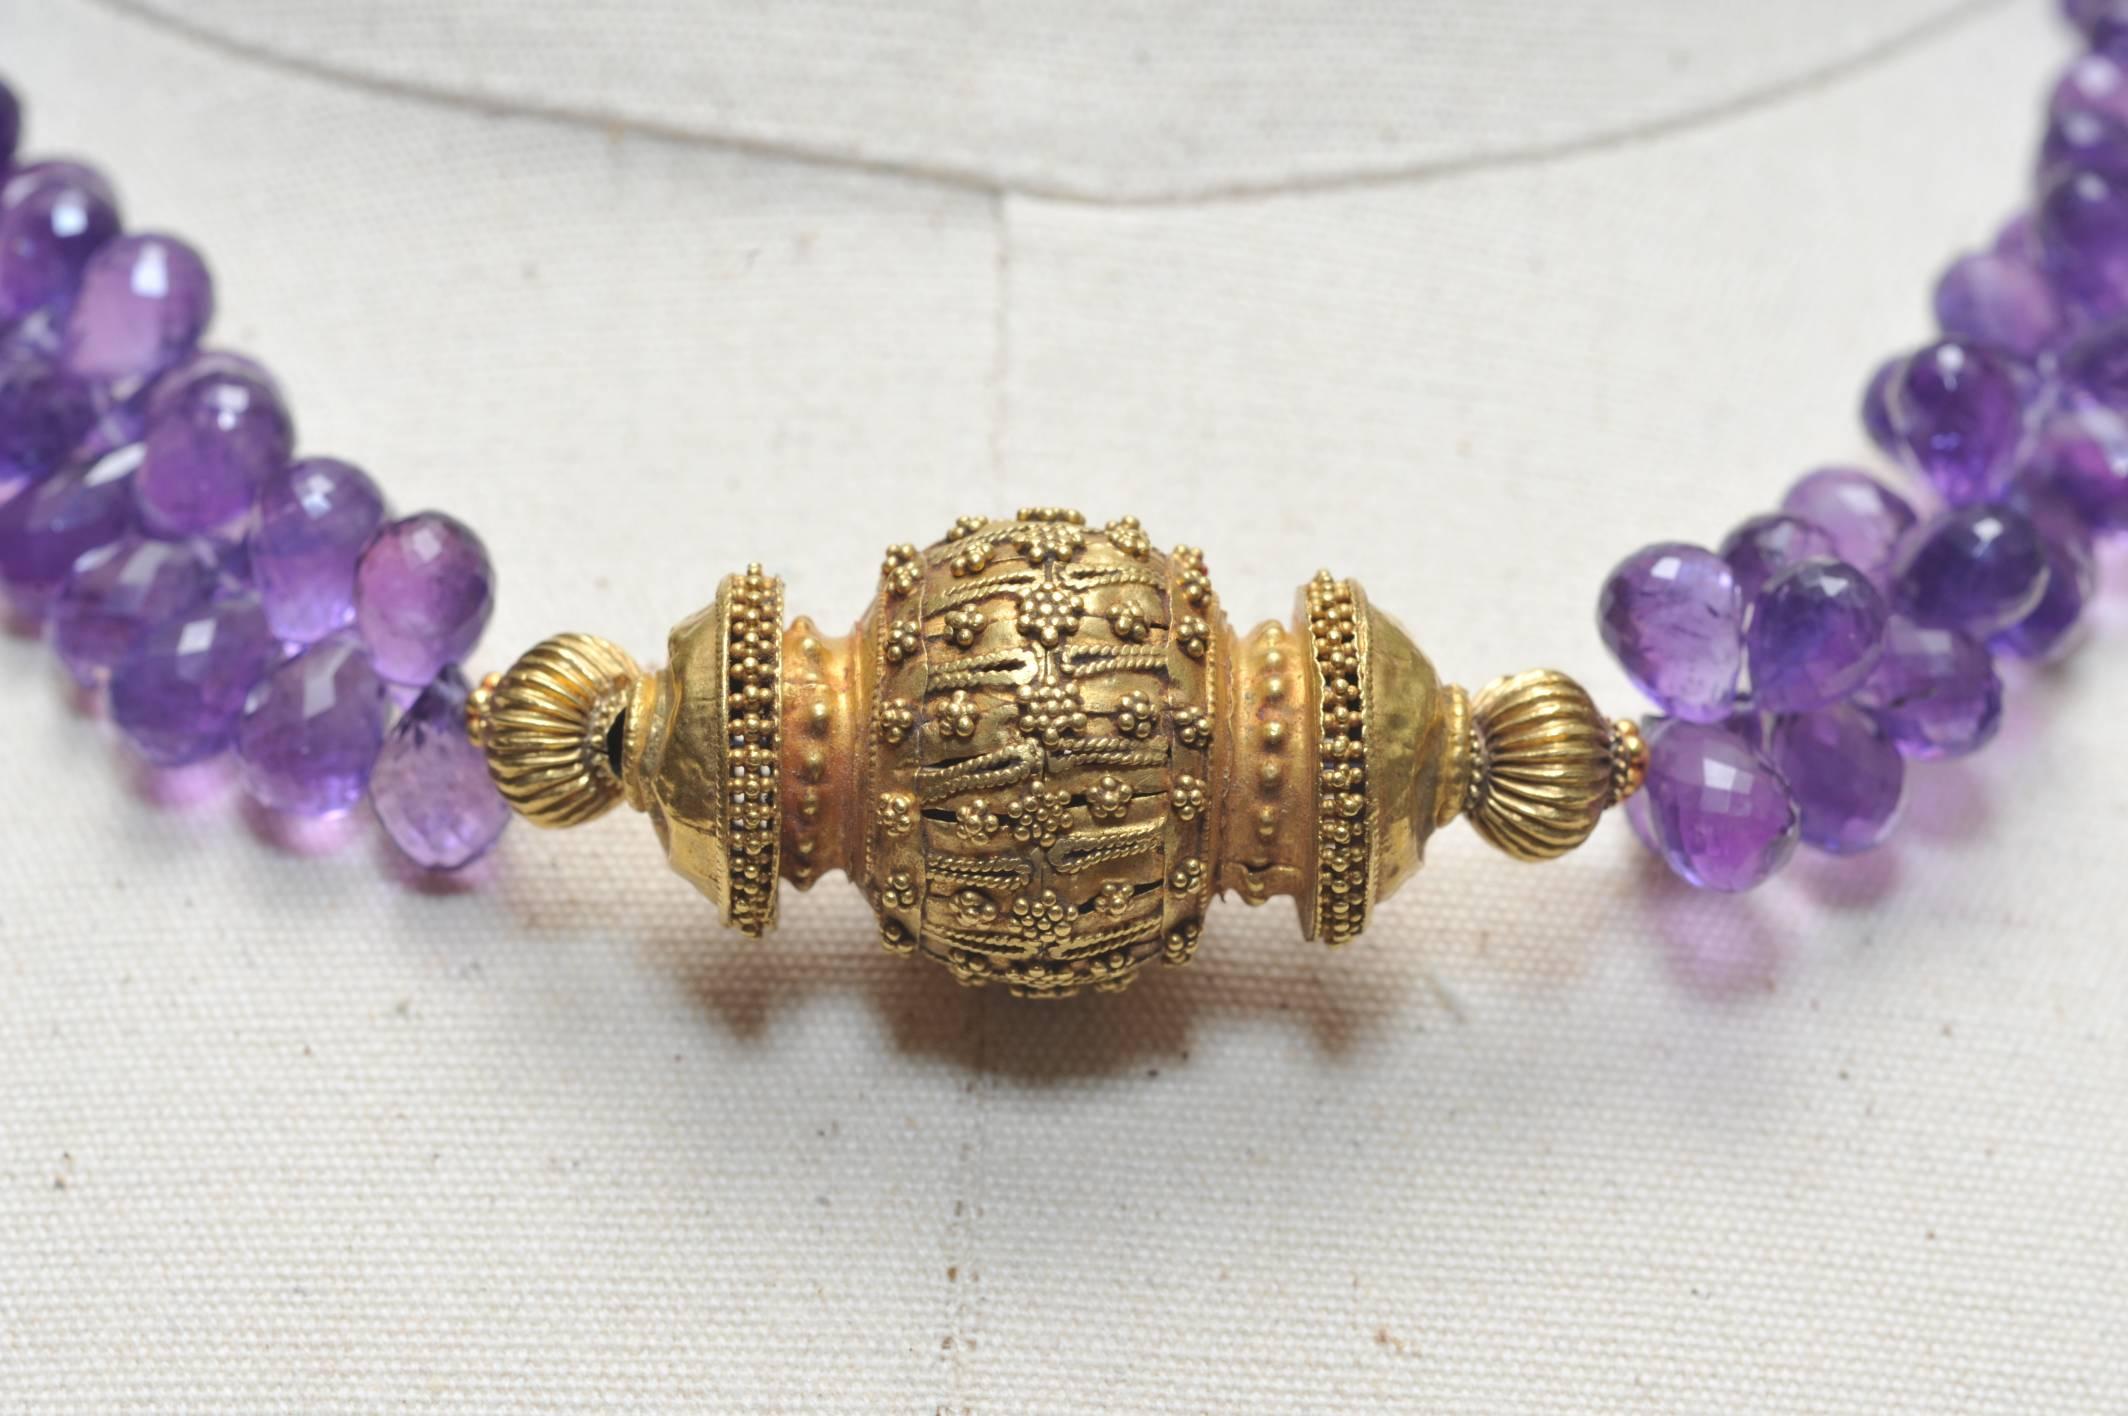 A rare, old 22K gold Indian centerpiece bead with fine granulation work strung with a cluster of fine quality and color, faceted amethyst briolettes.  Just the gold portion of the necklace measures 2.25 inches long x .875 inches wide.